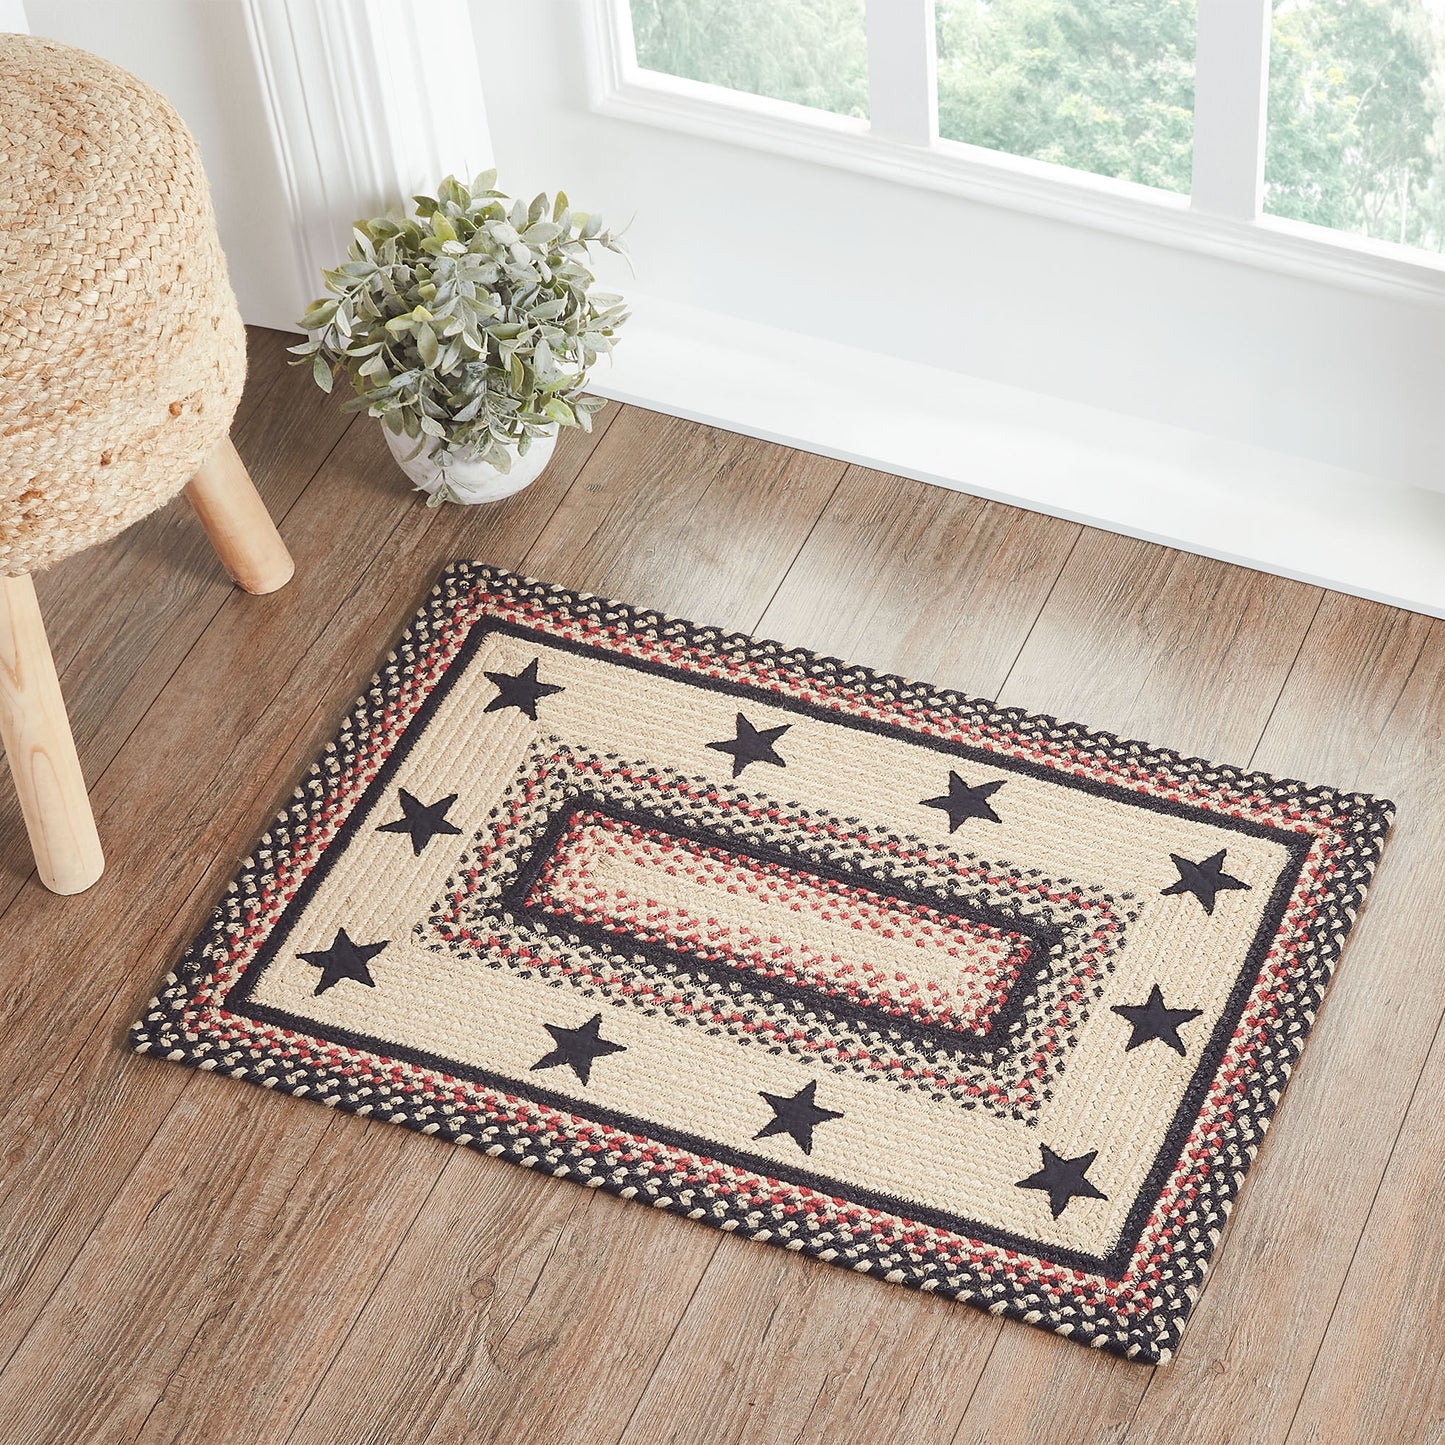 67012-Colonial-Star-Jute-Rug-Rect-w-Pad-20x30-image-6